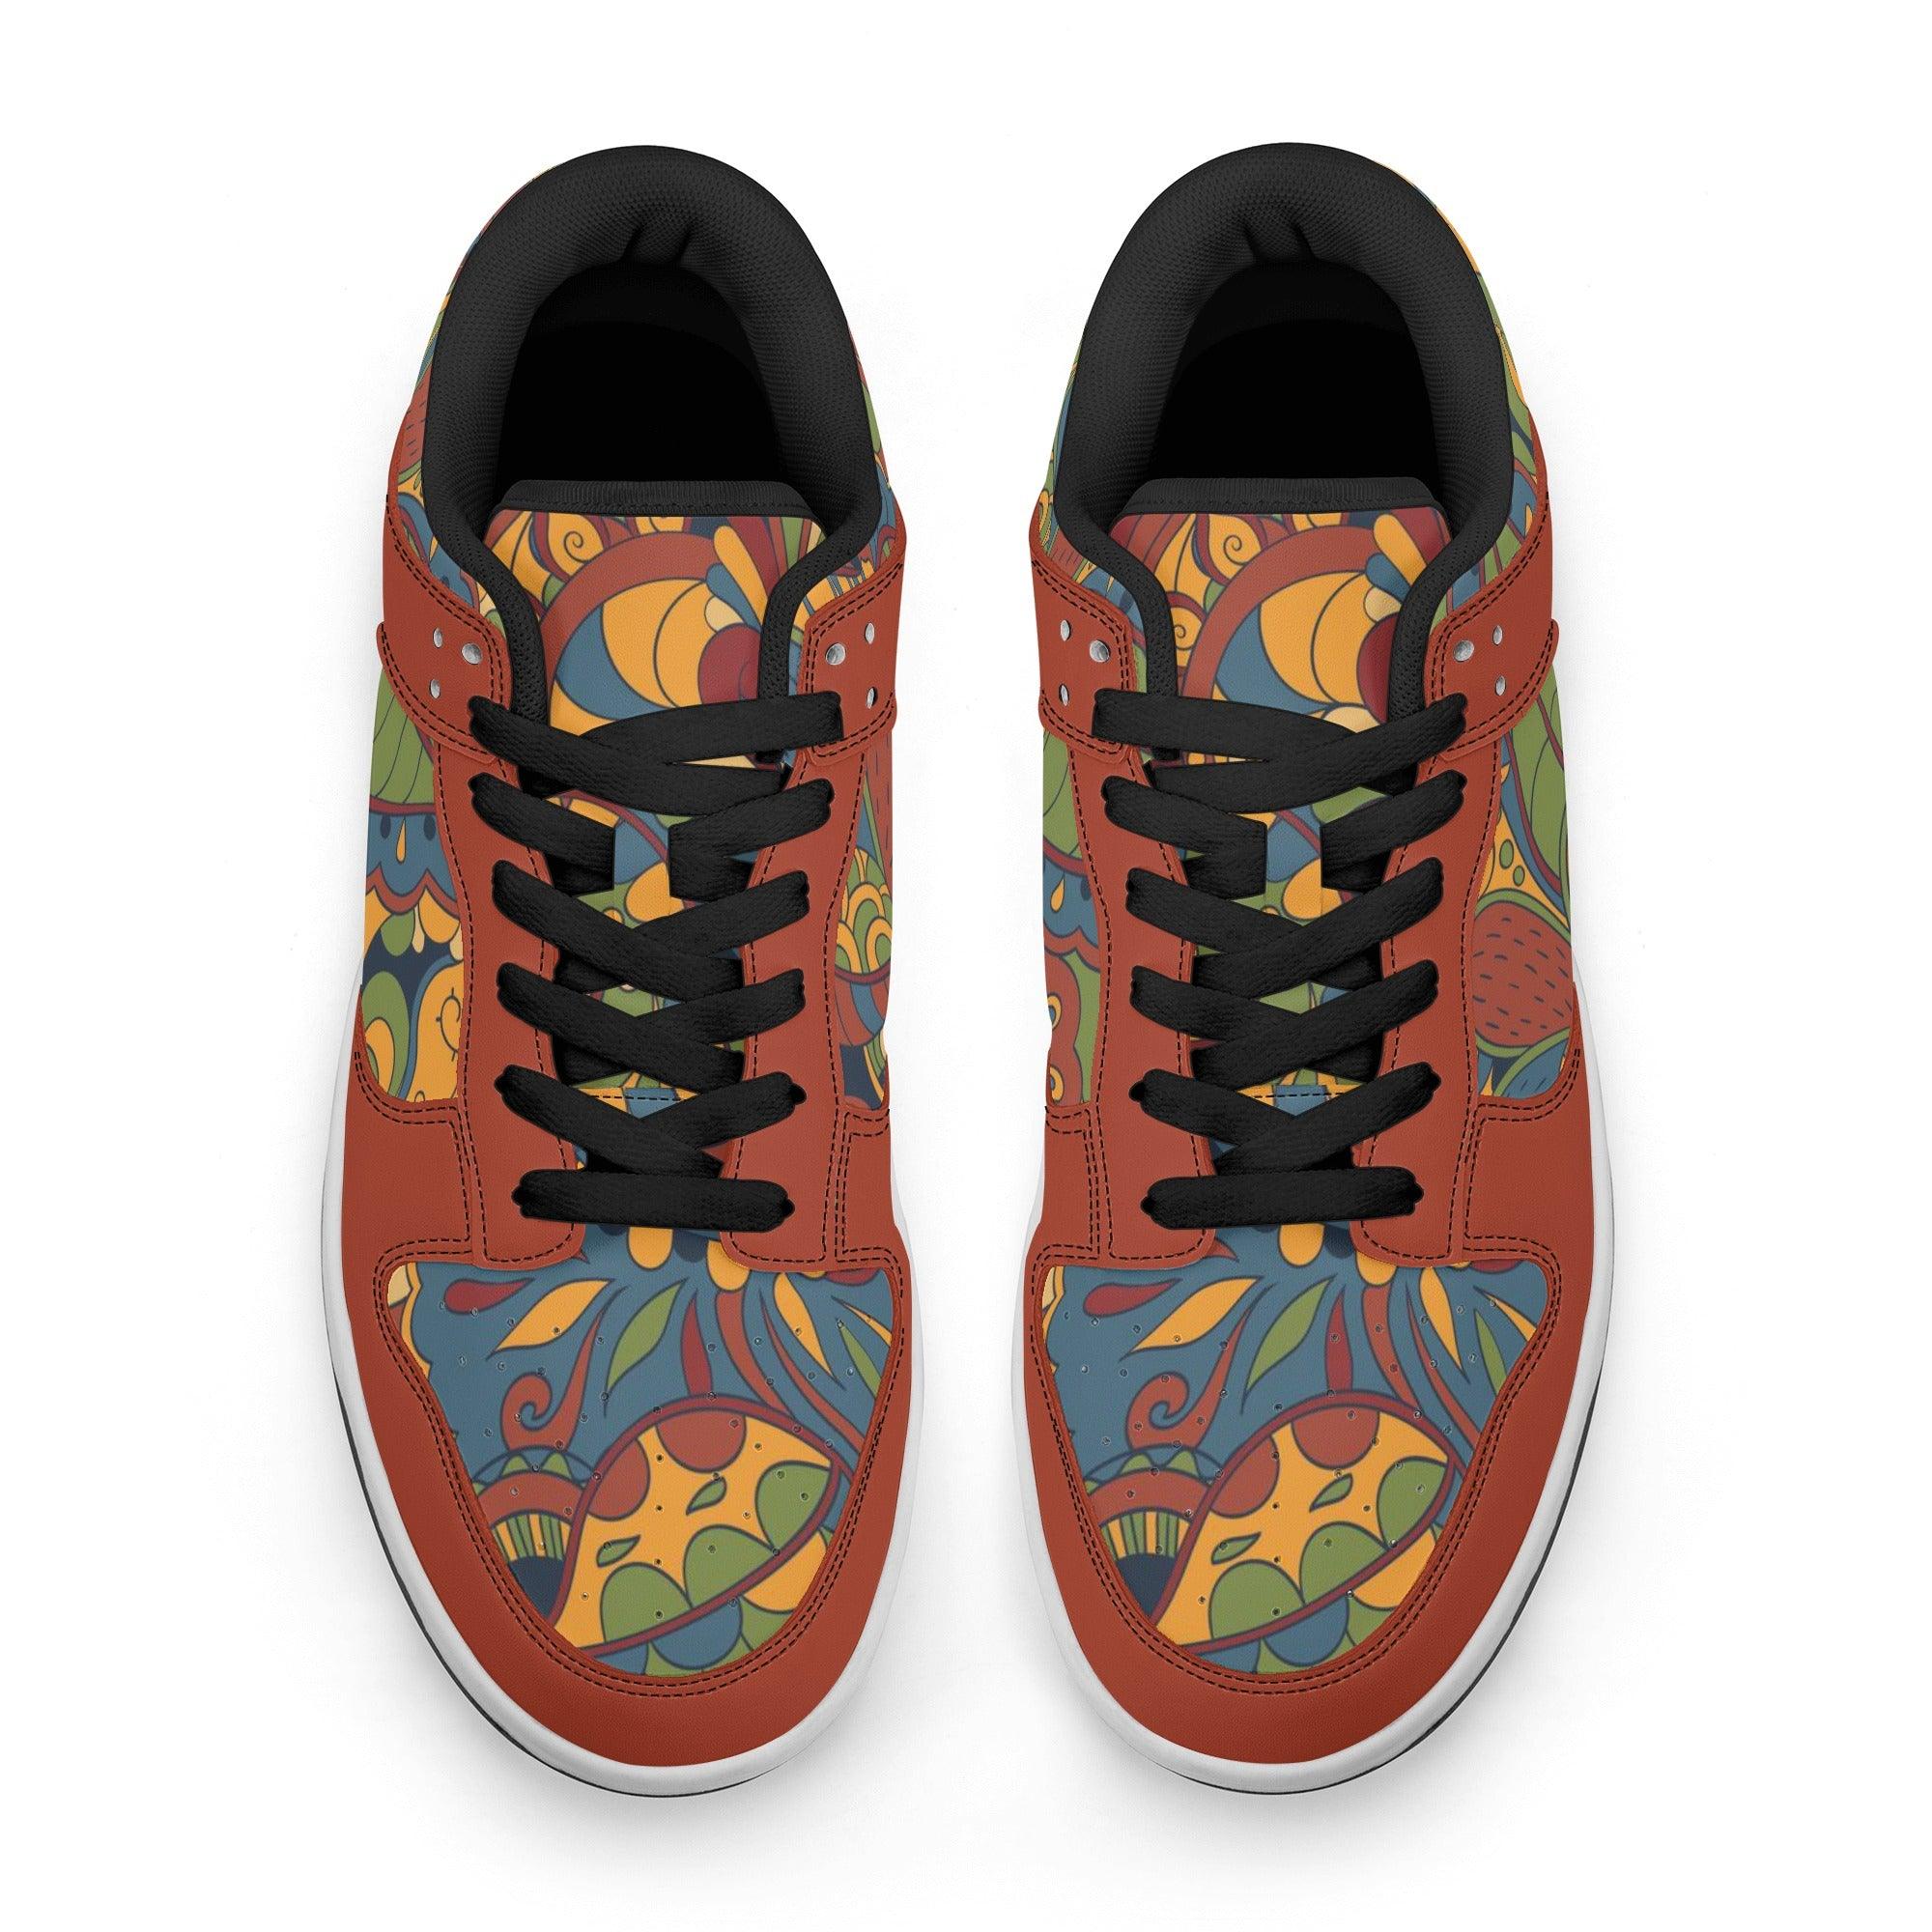 Ebisa Low Top Sneakers - Psychedelic Paisley - Red Mixed Media Retro Inspired Black Lace Casual Faux Leather Funky - Blissfully Brand